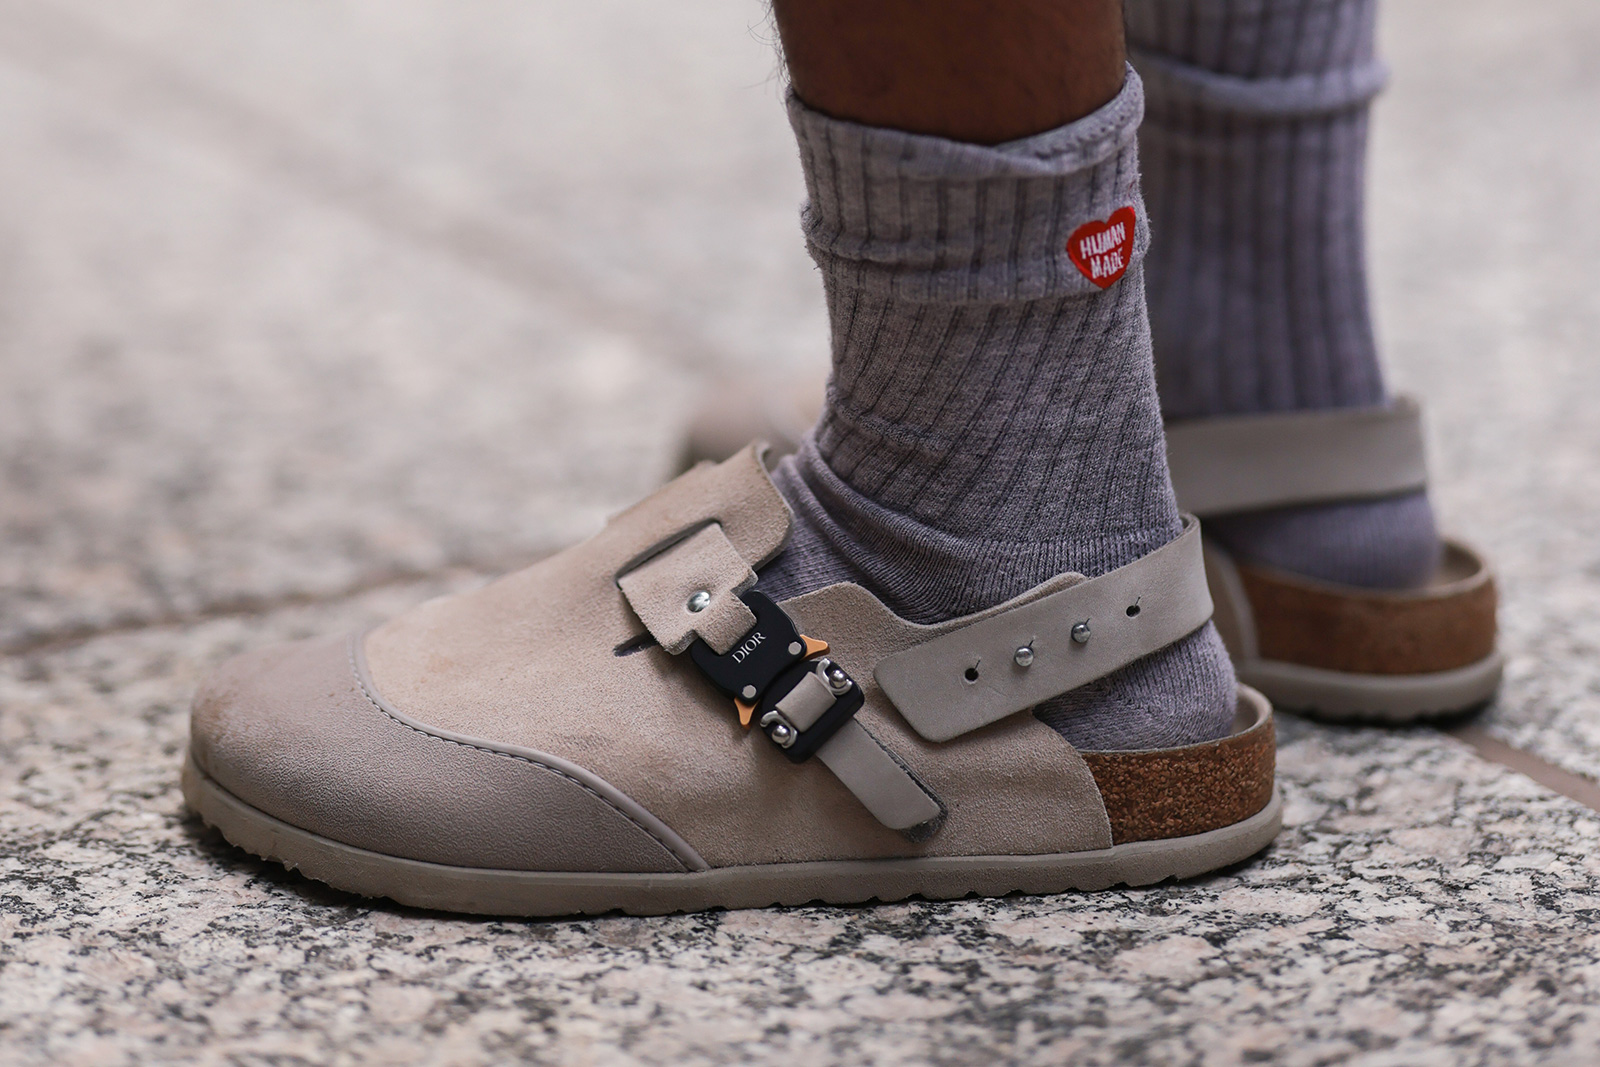 Wearing Socks With Sandals: The Definitive Styling Guide